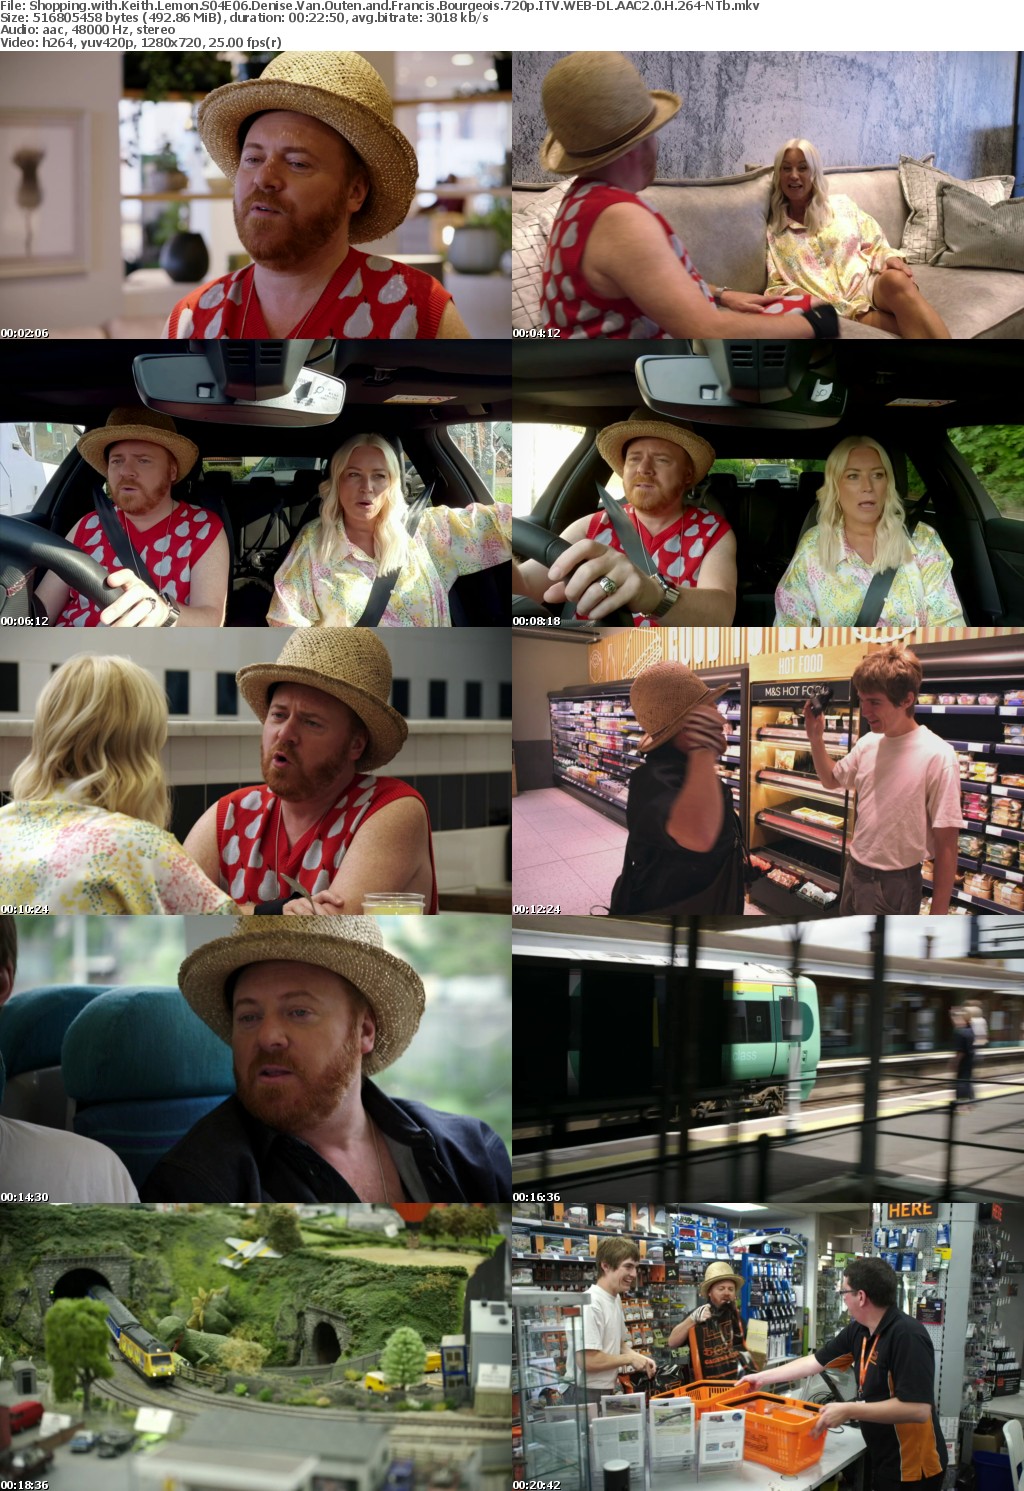 Shopping with Keith Lemon S04E06 Denise Van Outen and Francis Bourgeois 720p ITV WEB-DL AAC2 0 H 264-NTb